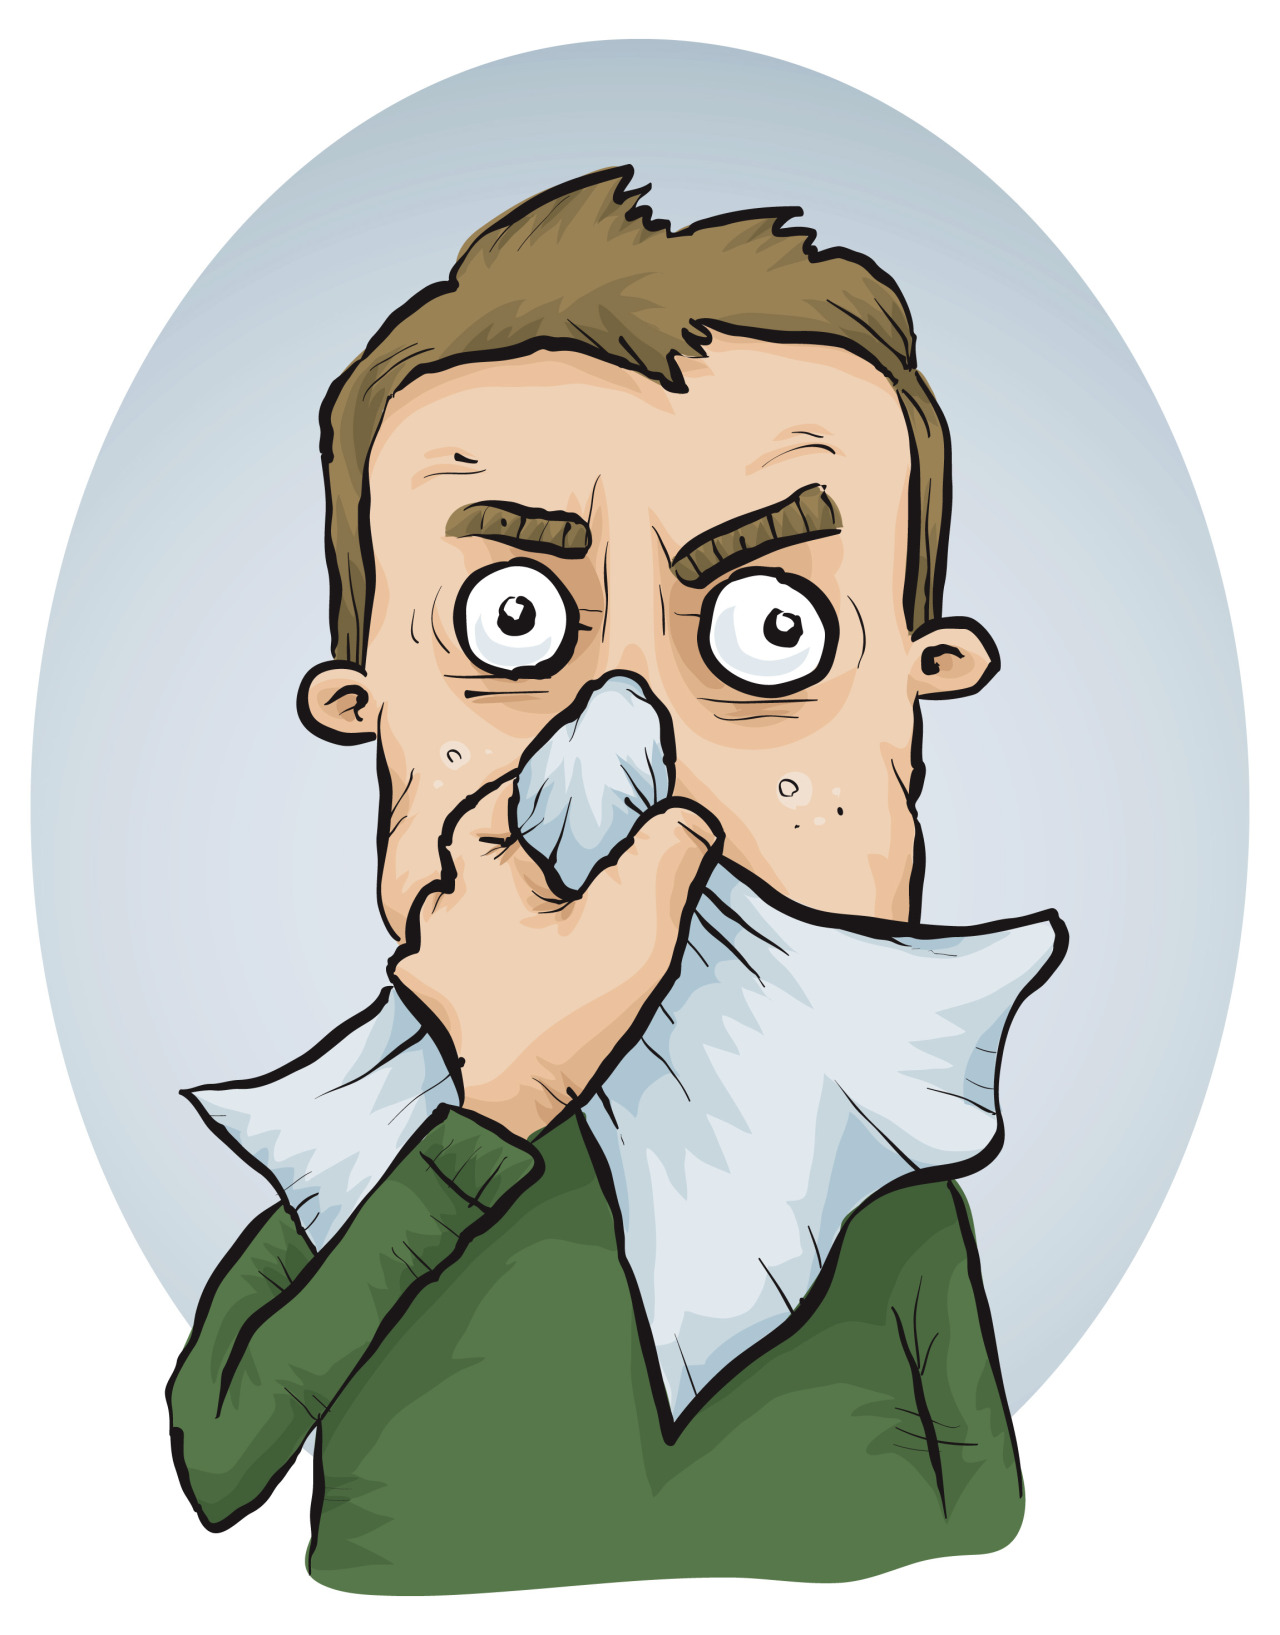 Images of men with colds and allergies